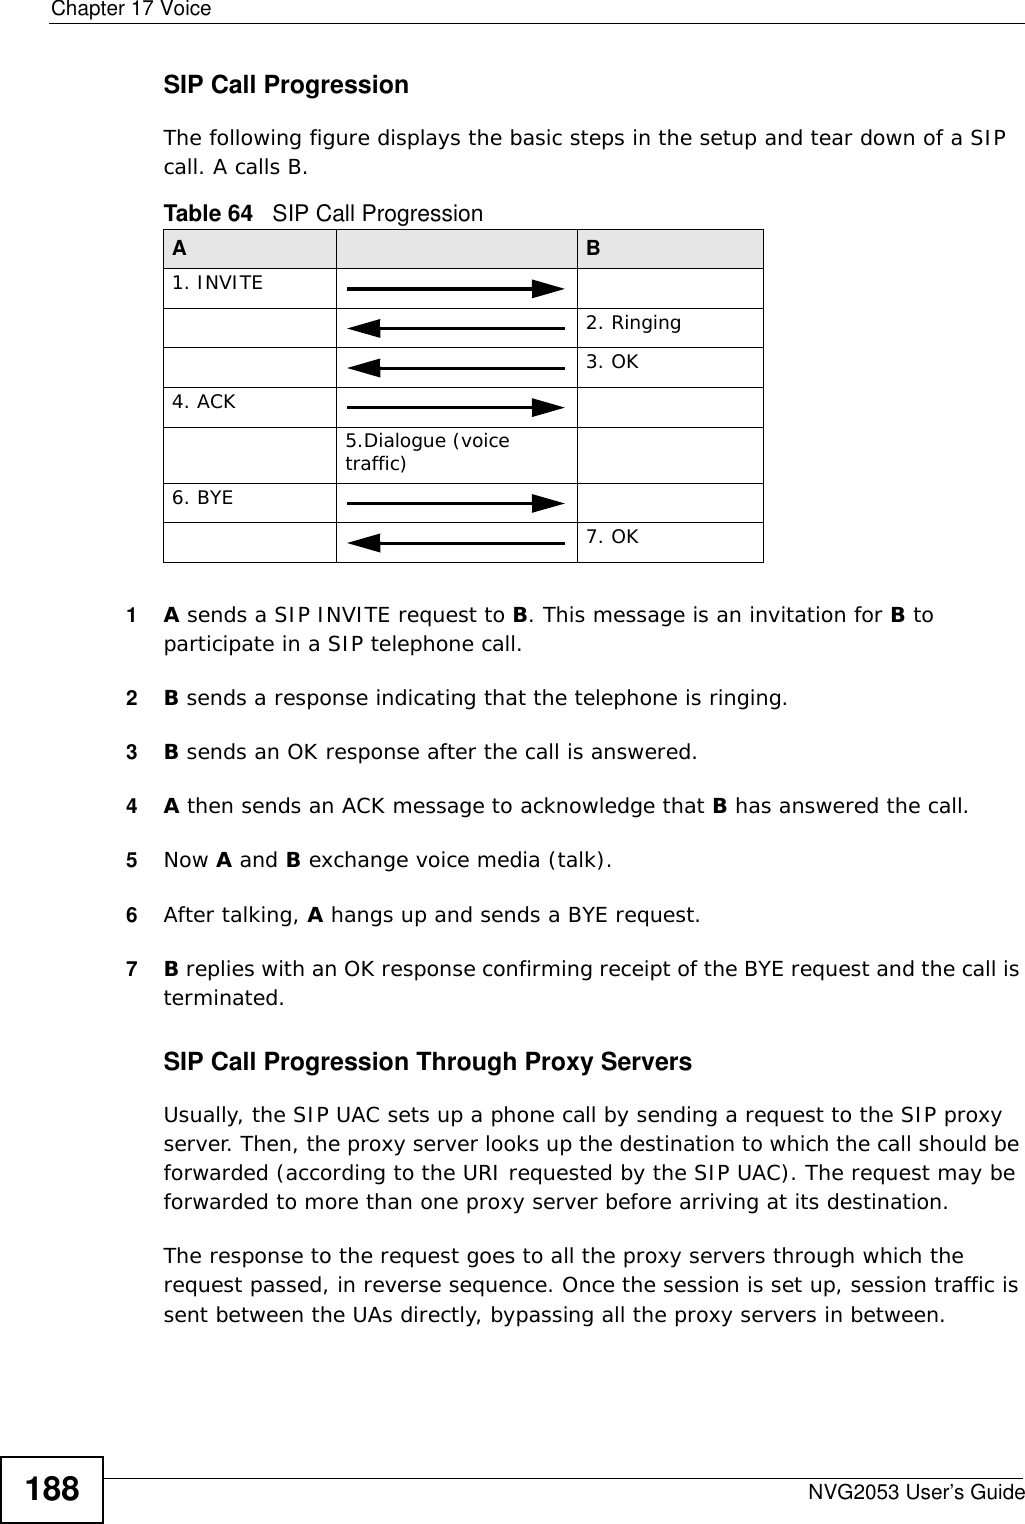 Chapter 17 VoiceNVG2053 User’s Guide188SIP Call ProgressionThe following figure displays the basic steps in the setup and tear down of a SIP call. A calls B. 1A sends a SIP INVITE request to B. This message is an invitation for B to participate in a SIP telephone call. 2B sends a response indicating that the telephone is ringing.3B sends an OK response after the call is answered. 4A then sends an ACK message to acknowledge that B has answered the call. 5Now A and B exchange voice media (talk). 6After talking, A hangs up and sends a BYE request. 7B replies with an OK response confirming receipt of the BYE request and the call is terminated.SIP Call Progression Through Proxy ServersUsually, the SIP UAC sets up a phone call by sending a request to the SIP proxy server. Then, the proxy server looks up the destination to which the call should be forwarded (according to the URI requested by the SIP UAC). The request may be forwarded to more than one proxy server before arriving at its destination. The response to the request goes to all the proxy servers through which the request passed, in reverse sequence. Once the session is set up, session traffic is sent between the UAs directly, bypassing all the proxy servers in between.Table 64   SIP Call ProgressionA B1. INVITE2. Ringing3. OK4. ACK 5.Dialogue (voice traffic)6. BYE7. OK